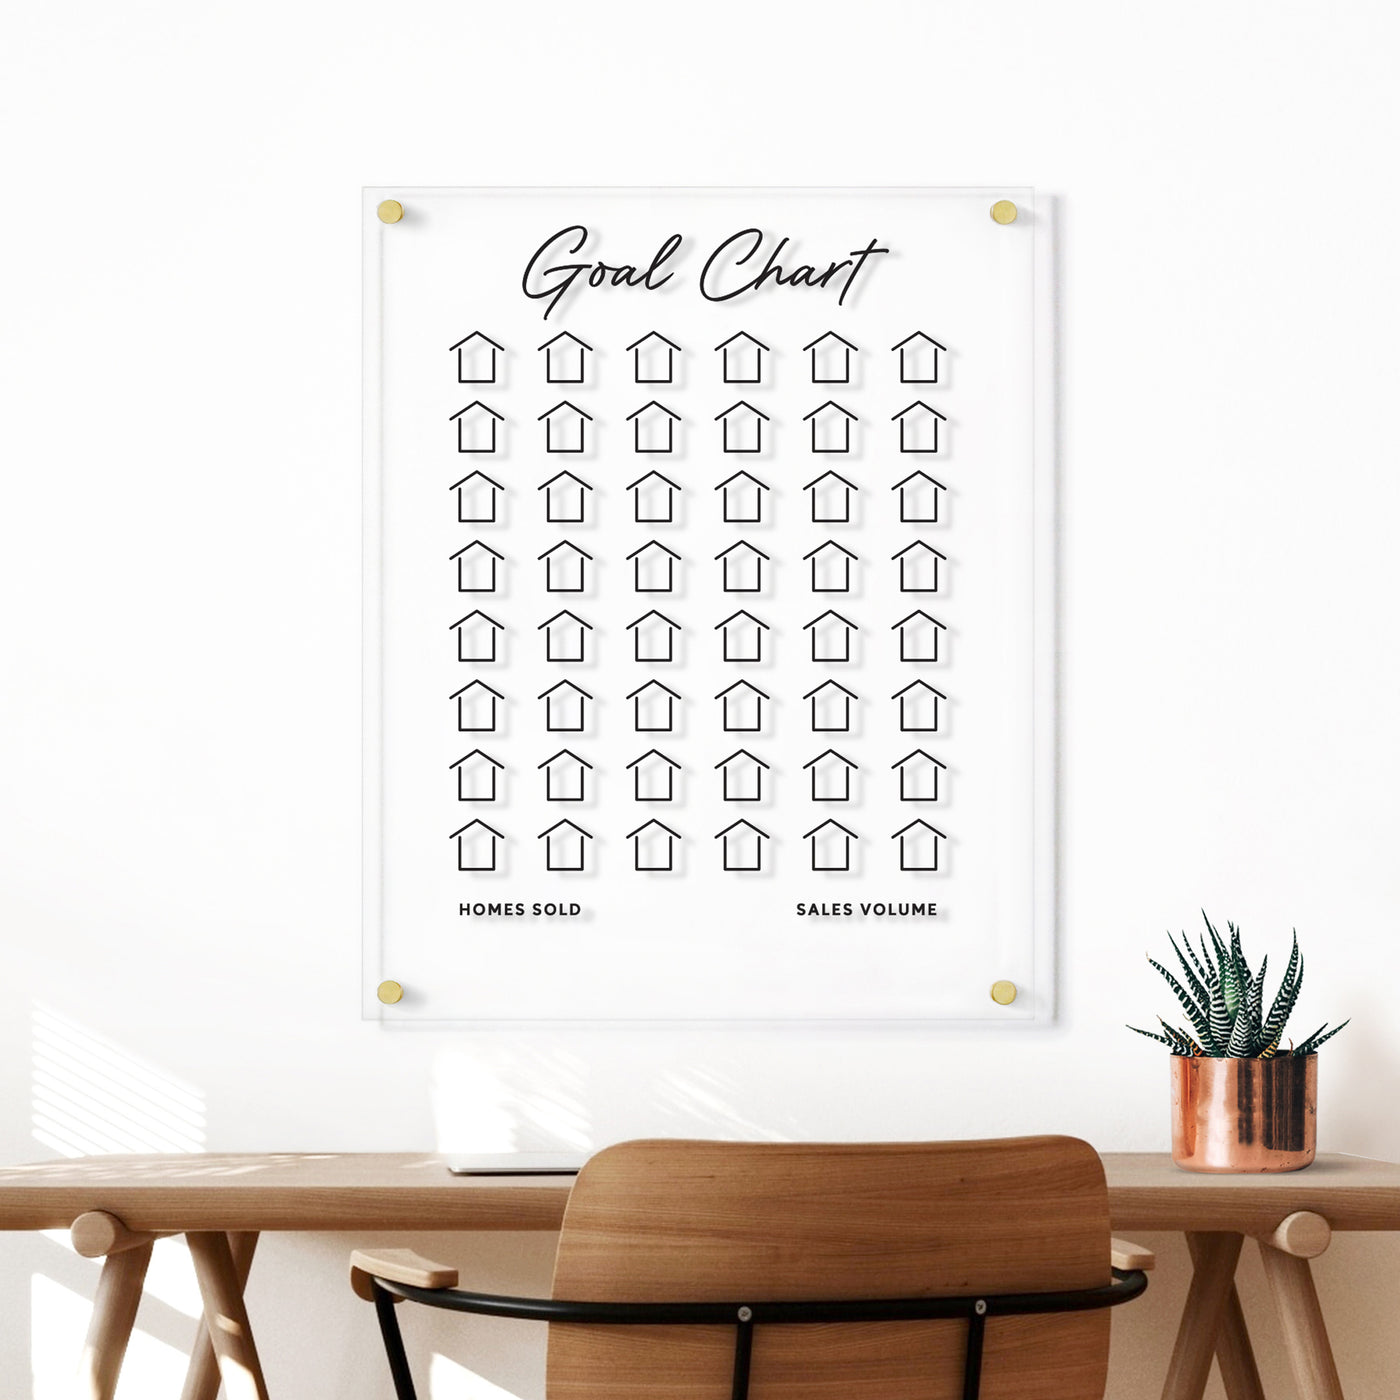 Goal Chart | Sales Tracker for Real Estate